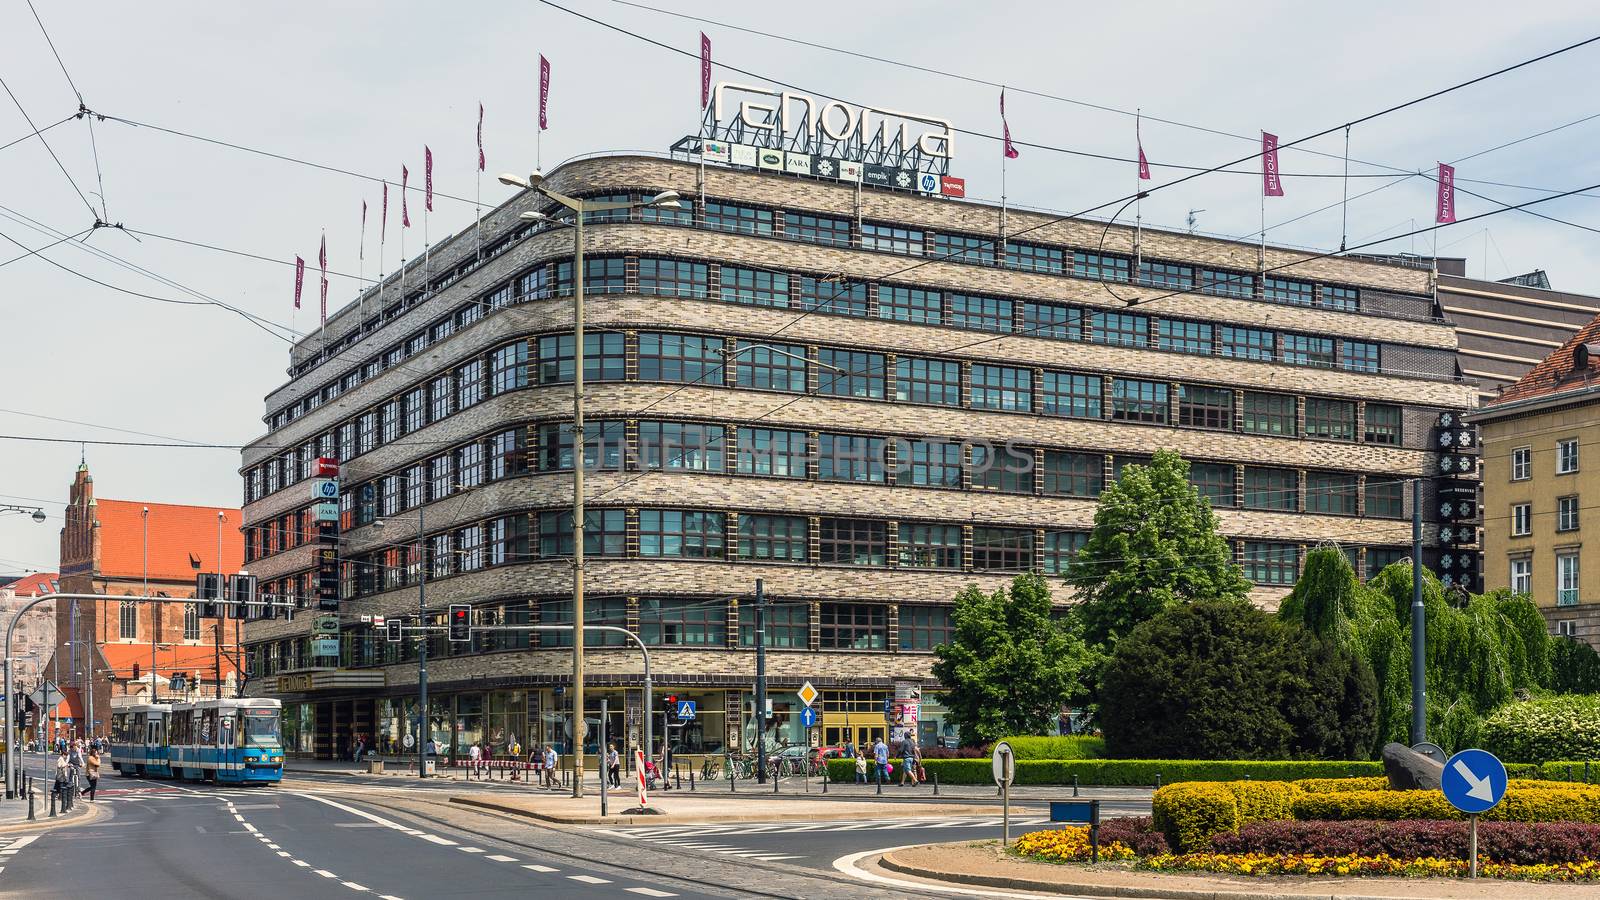 Shopping mall „Renoma” in Wroclaw built in 1930, designed by German architect  Hermann Dernburg. Building is commonly considered a flagship work of European Modernism.